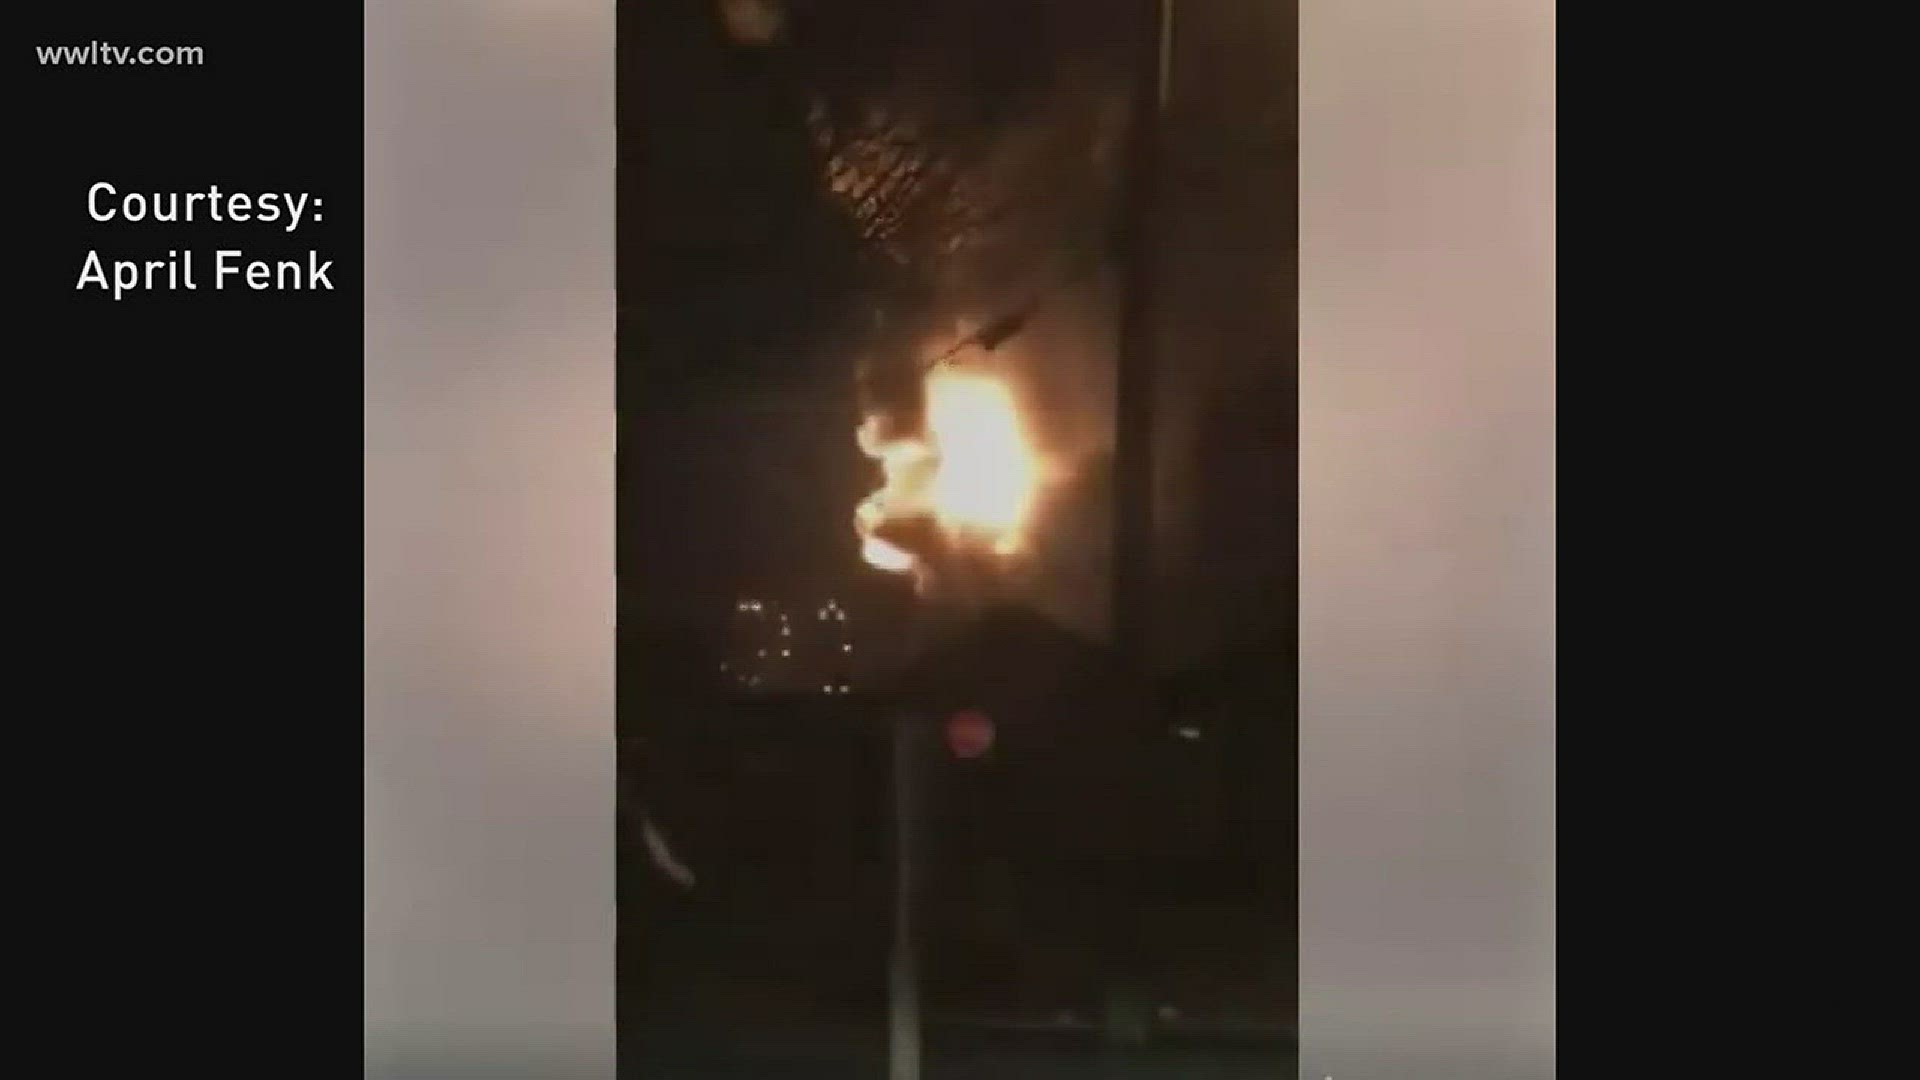 Chalmette refinery officials originally said the major flare up over the weekend was planned, but are now saying it was an accident.